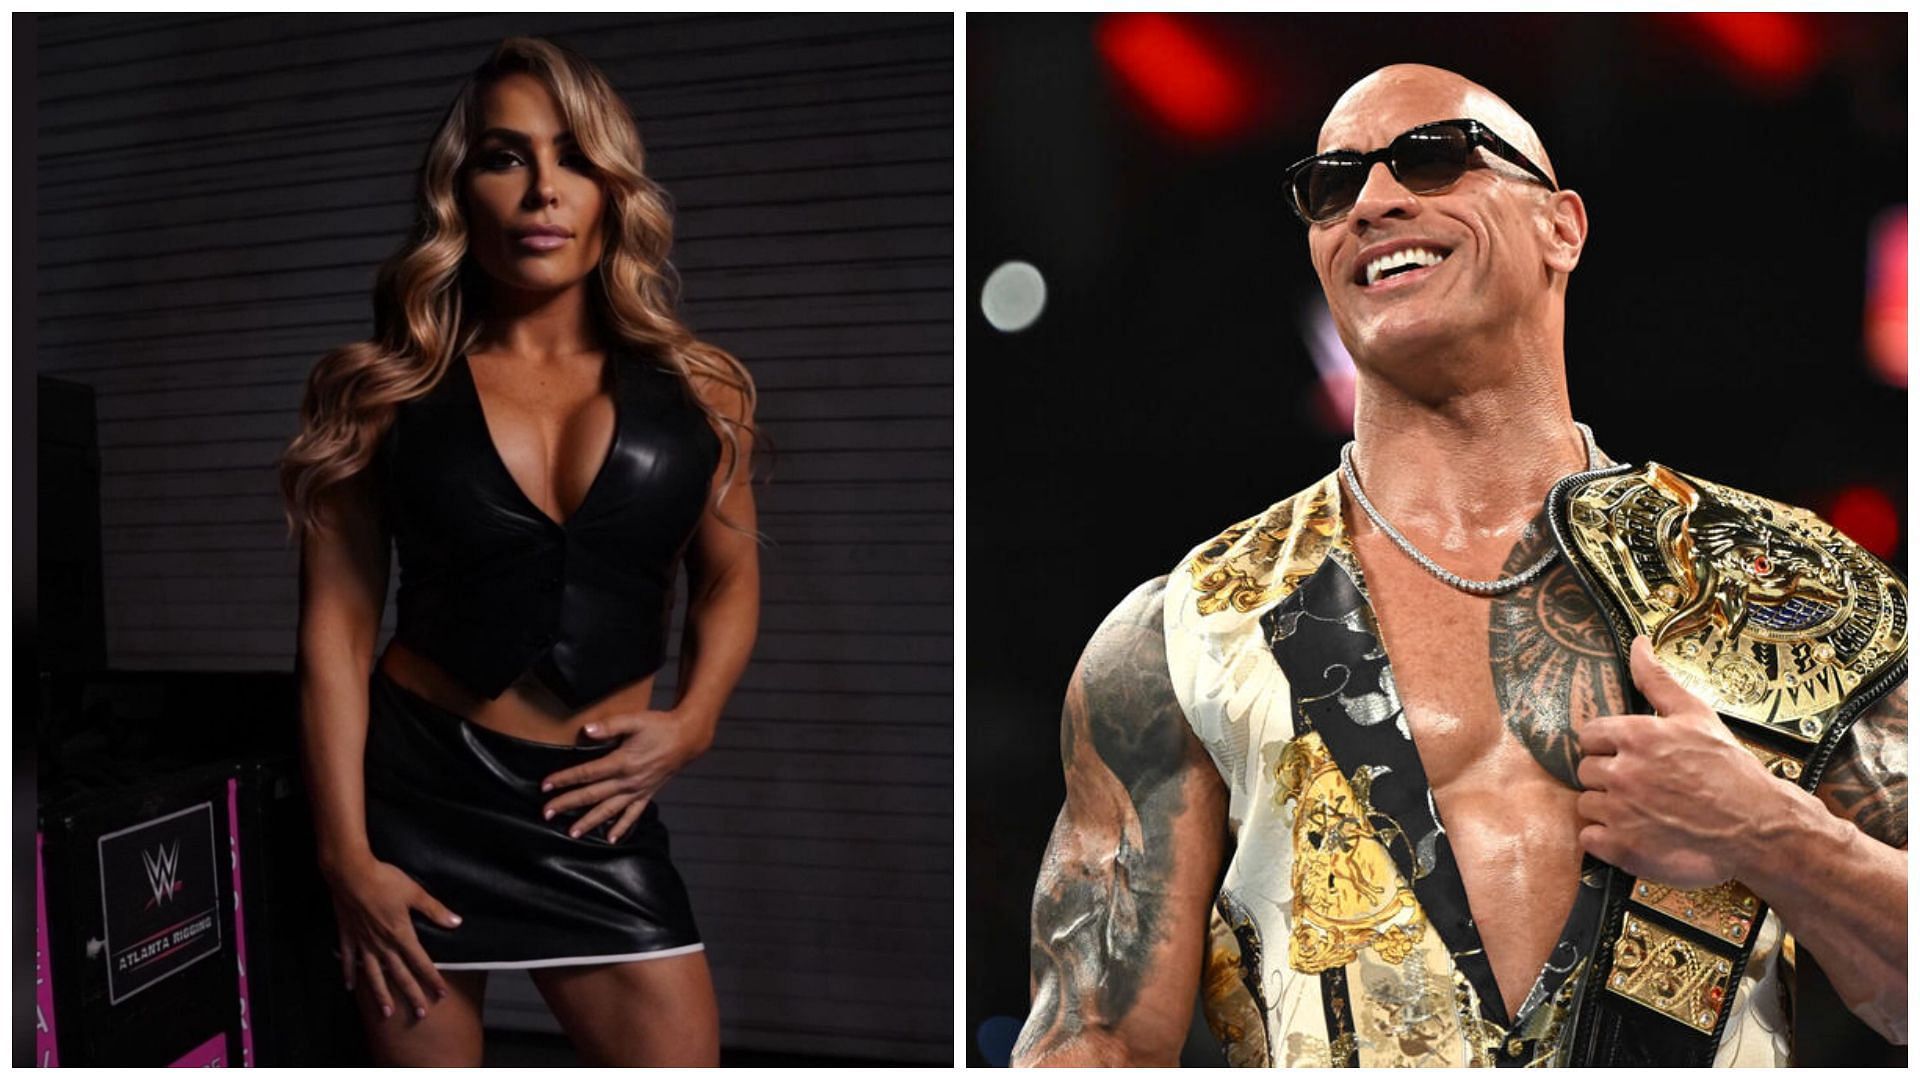 Natalya (left), and The Rock (right).